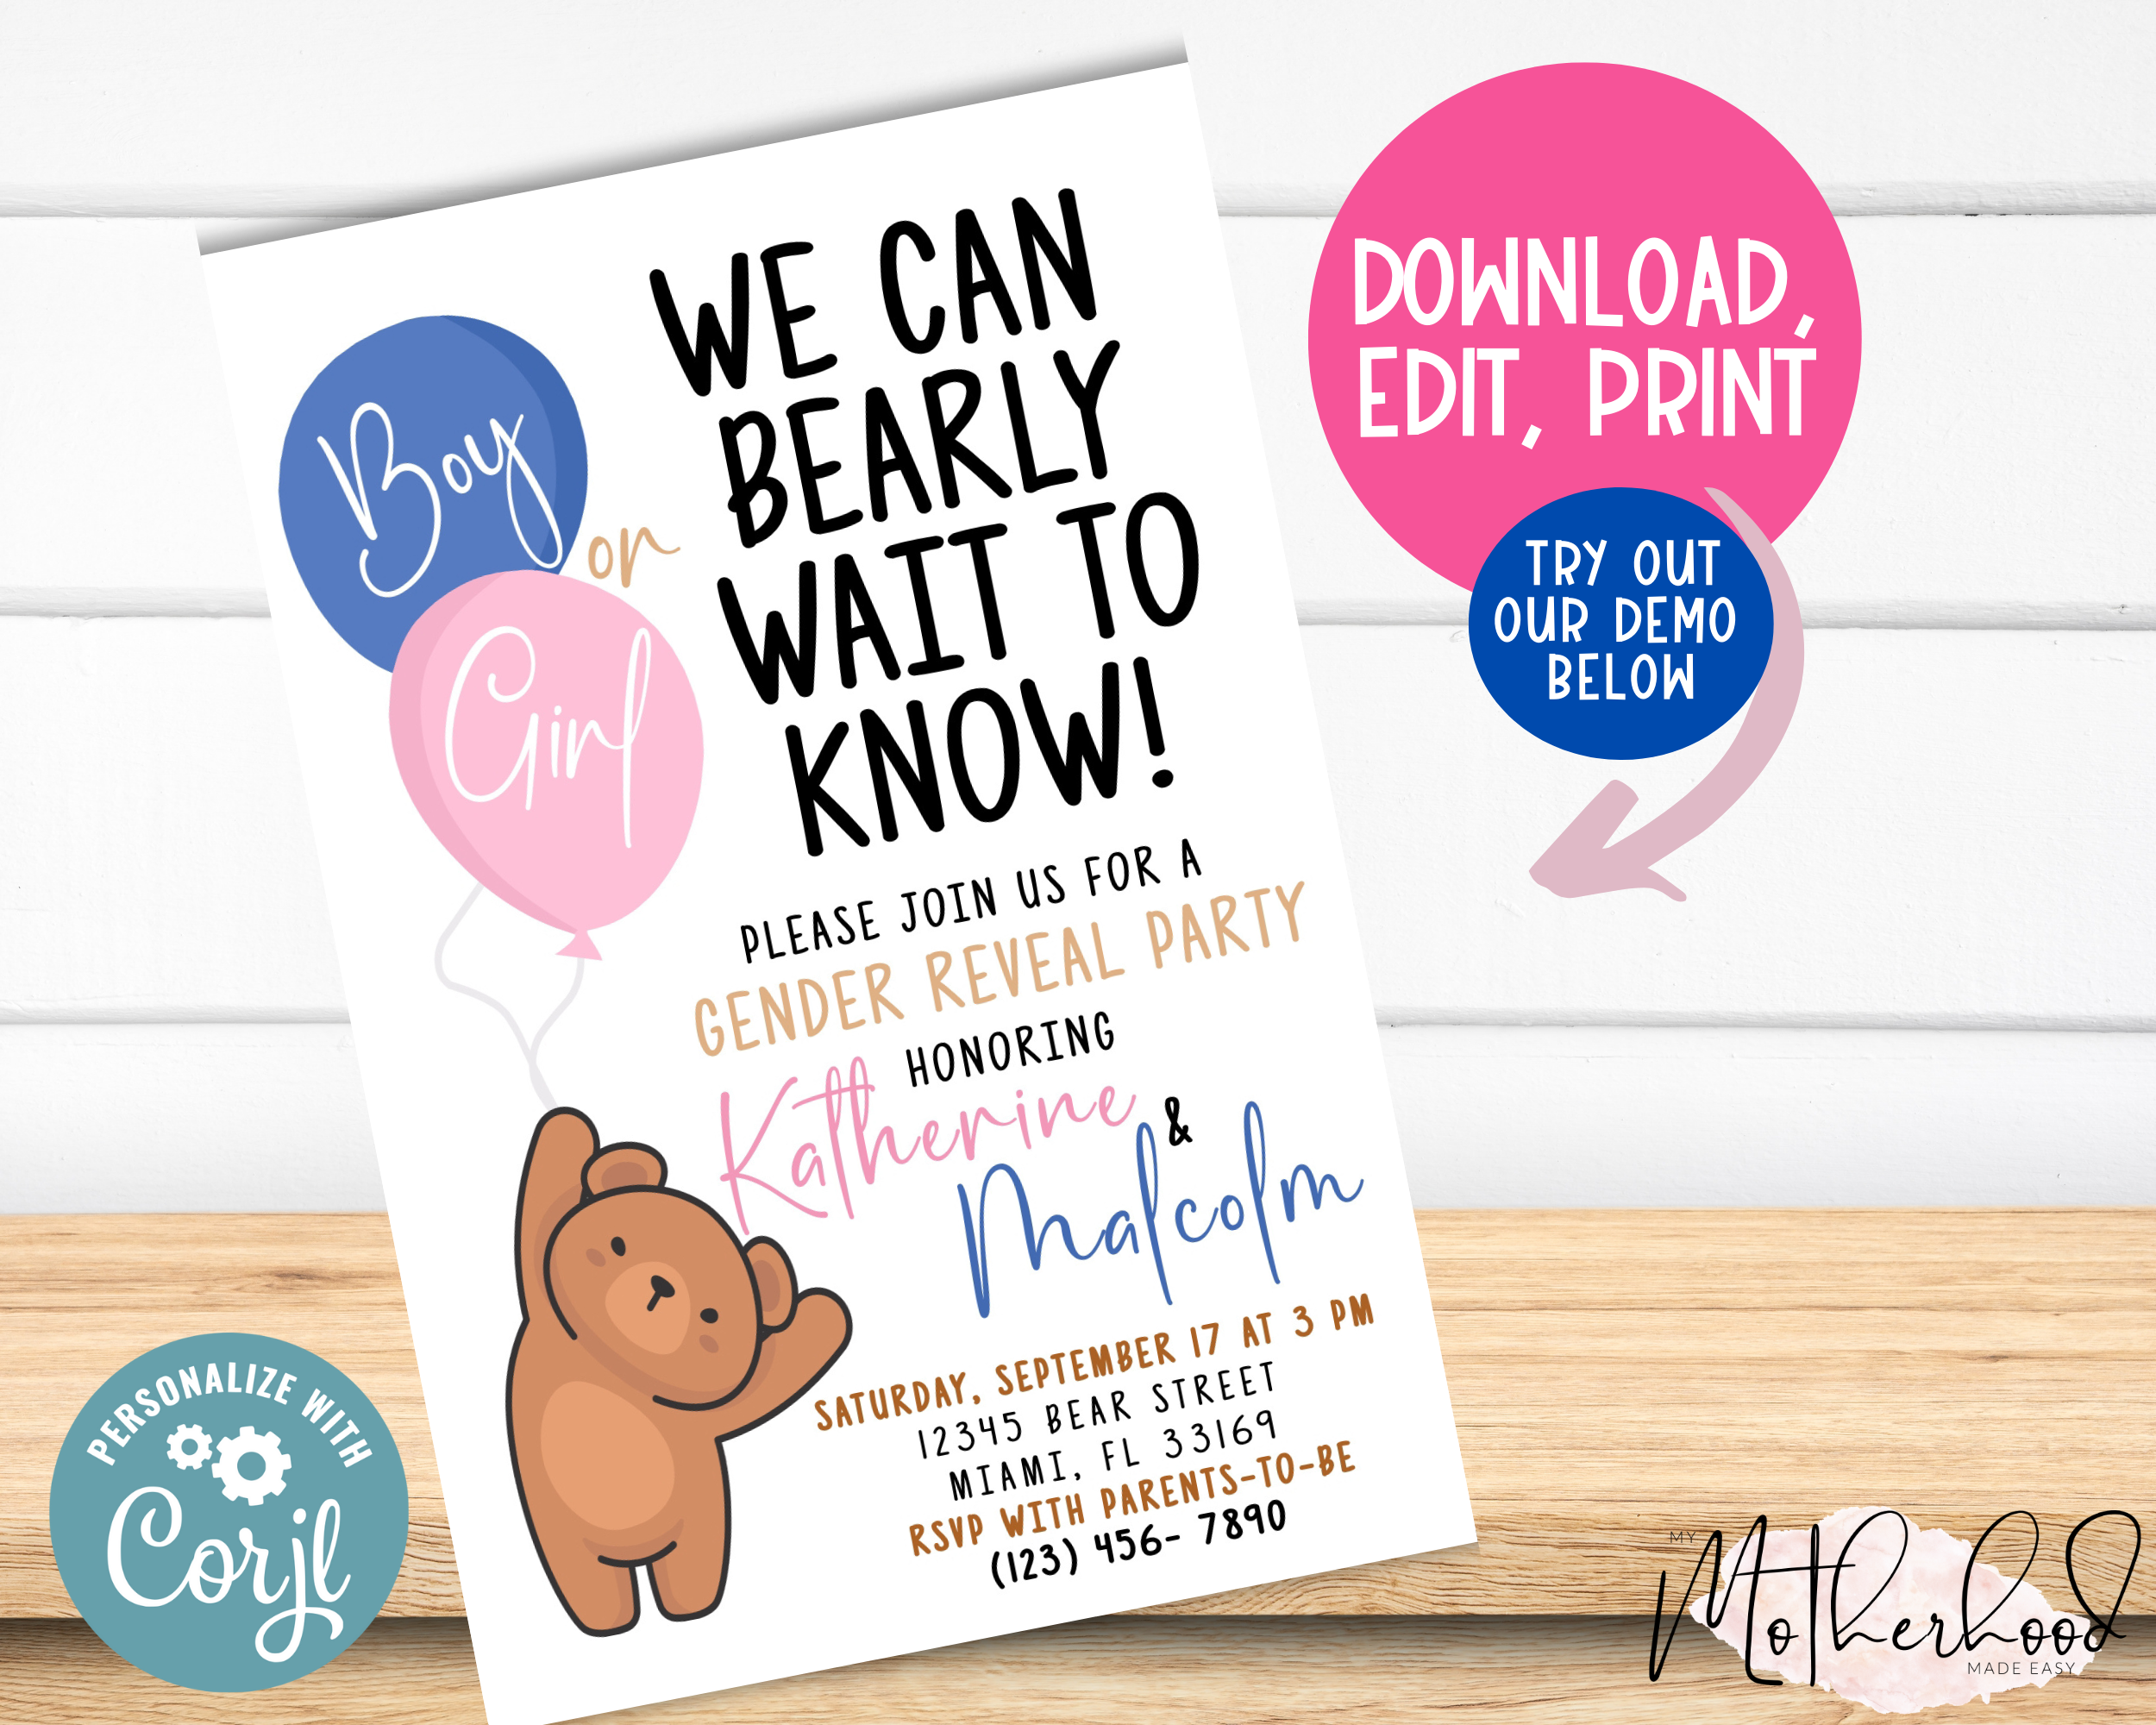 Editable We Can Bearly Wait To Know Gender Reveal Party Invitation- Pink and Blue- Teddy Bear - He or She- Boy or Girl - Teddy Bear  Introducing the Editable We Can Bearly Wait To Know Gender Reveal Party Invitation Card! This beautiful and personalizable Gender Reveal Party Invitation is the perfect way to invite your amazing friends and family to your gender reveal party. With a variety of colors and fonts to choose from, you can easily customize this party announcement to perfectly reflect your style. Whether you're sharing on social media or sending out physical party invitations, this stunning Gender Reveal Party Invitation is sure to get everyone excited for your baby reveal.